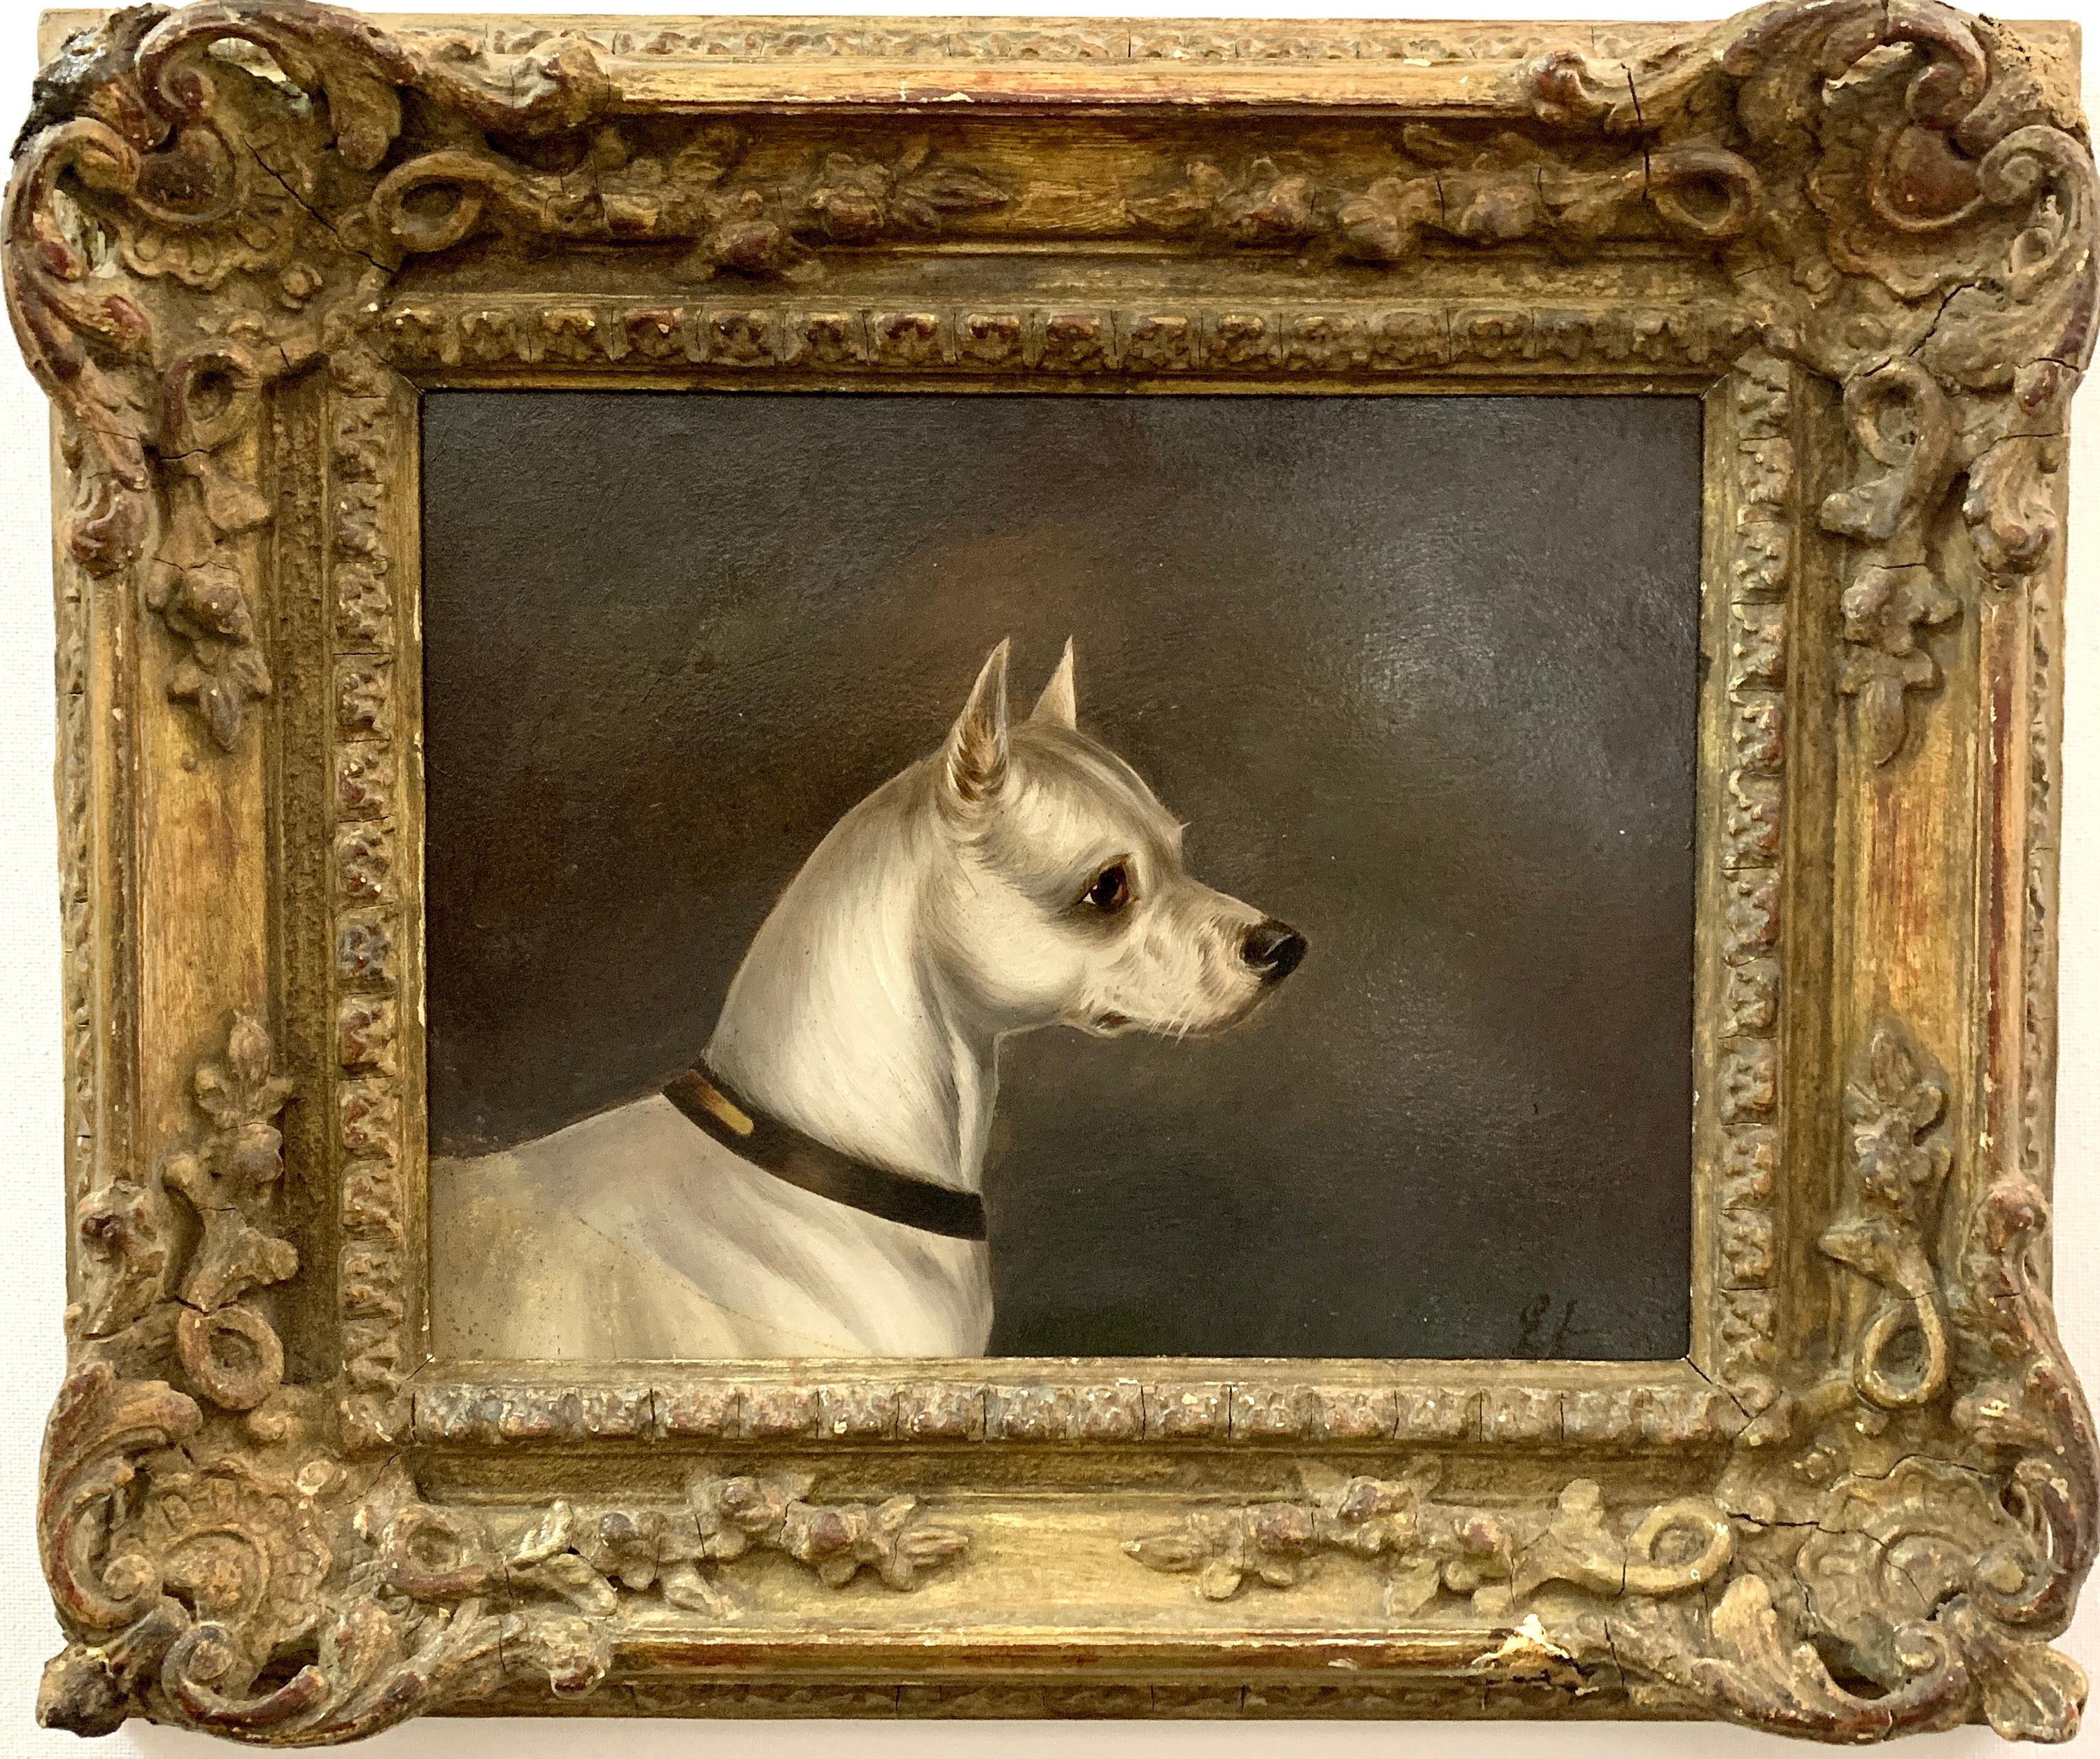 Edwin Loder Figurative Painting - 19th century English Antique Portrait of a Terrier dog in oils